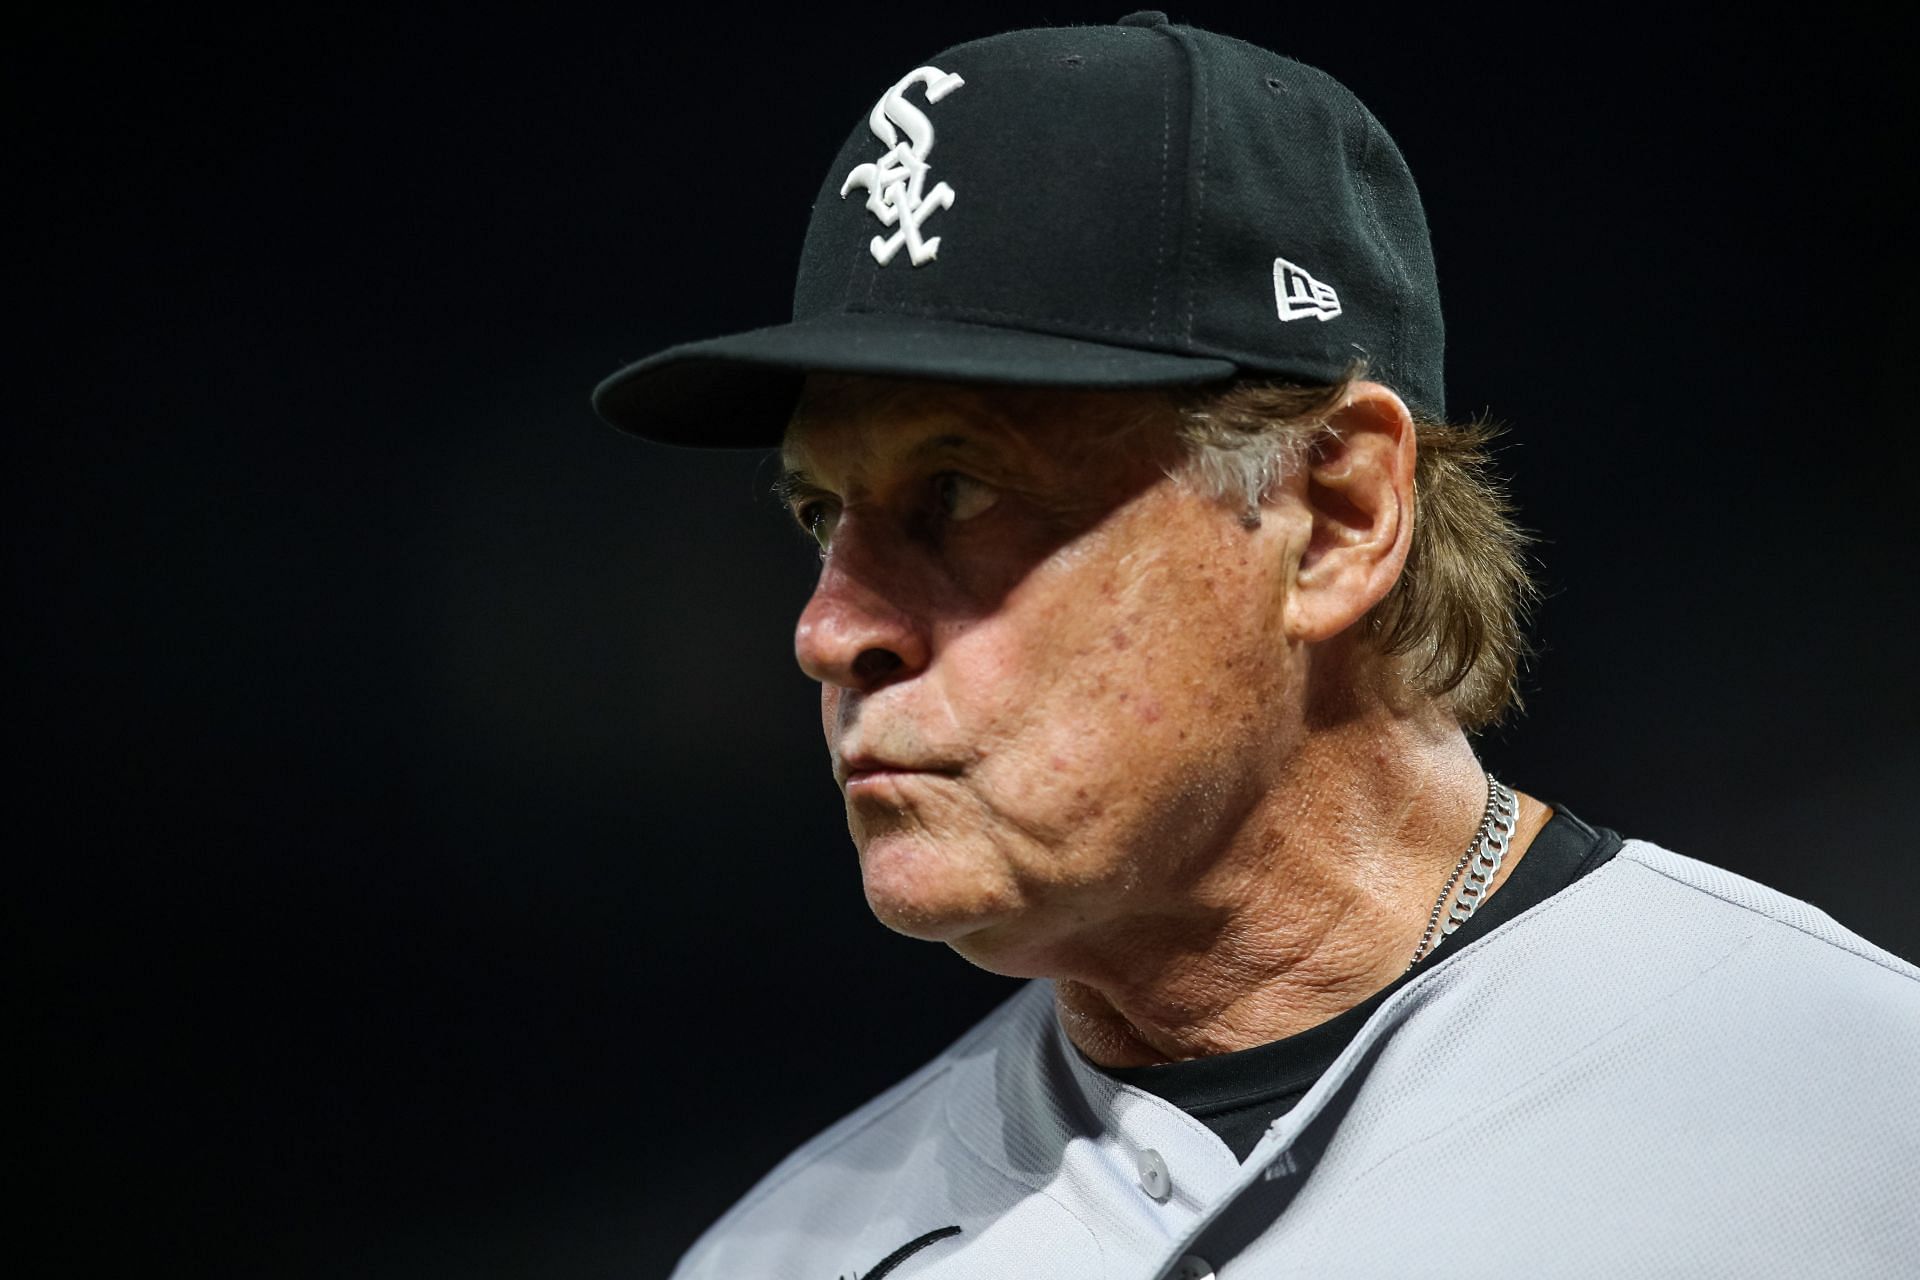 Chicago White Sox manager Tony LaRussa dissapproves of the way San Francisco Giants manager Gabe Kapler is protesting American gun laws